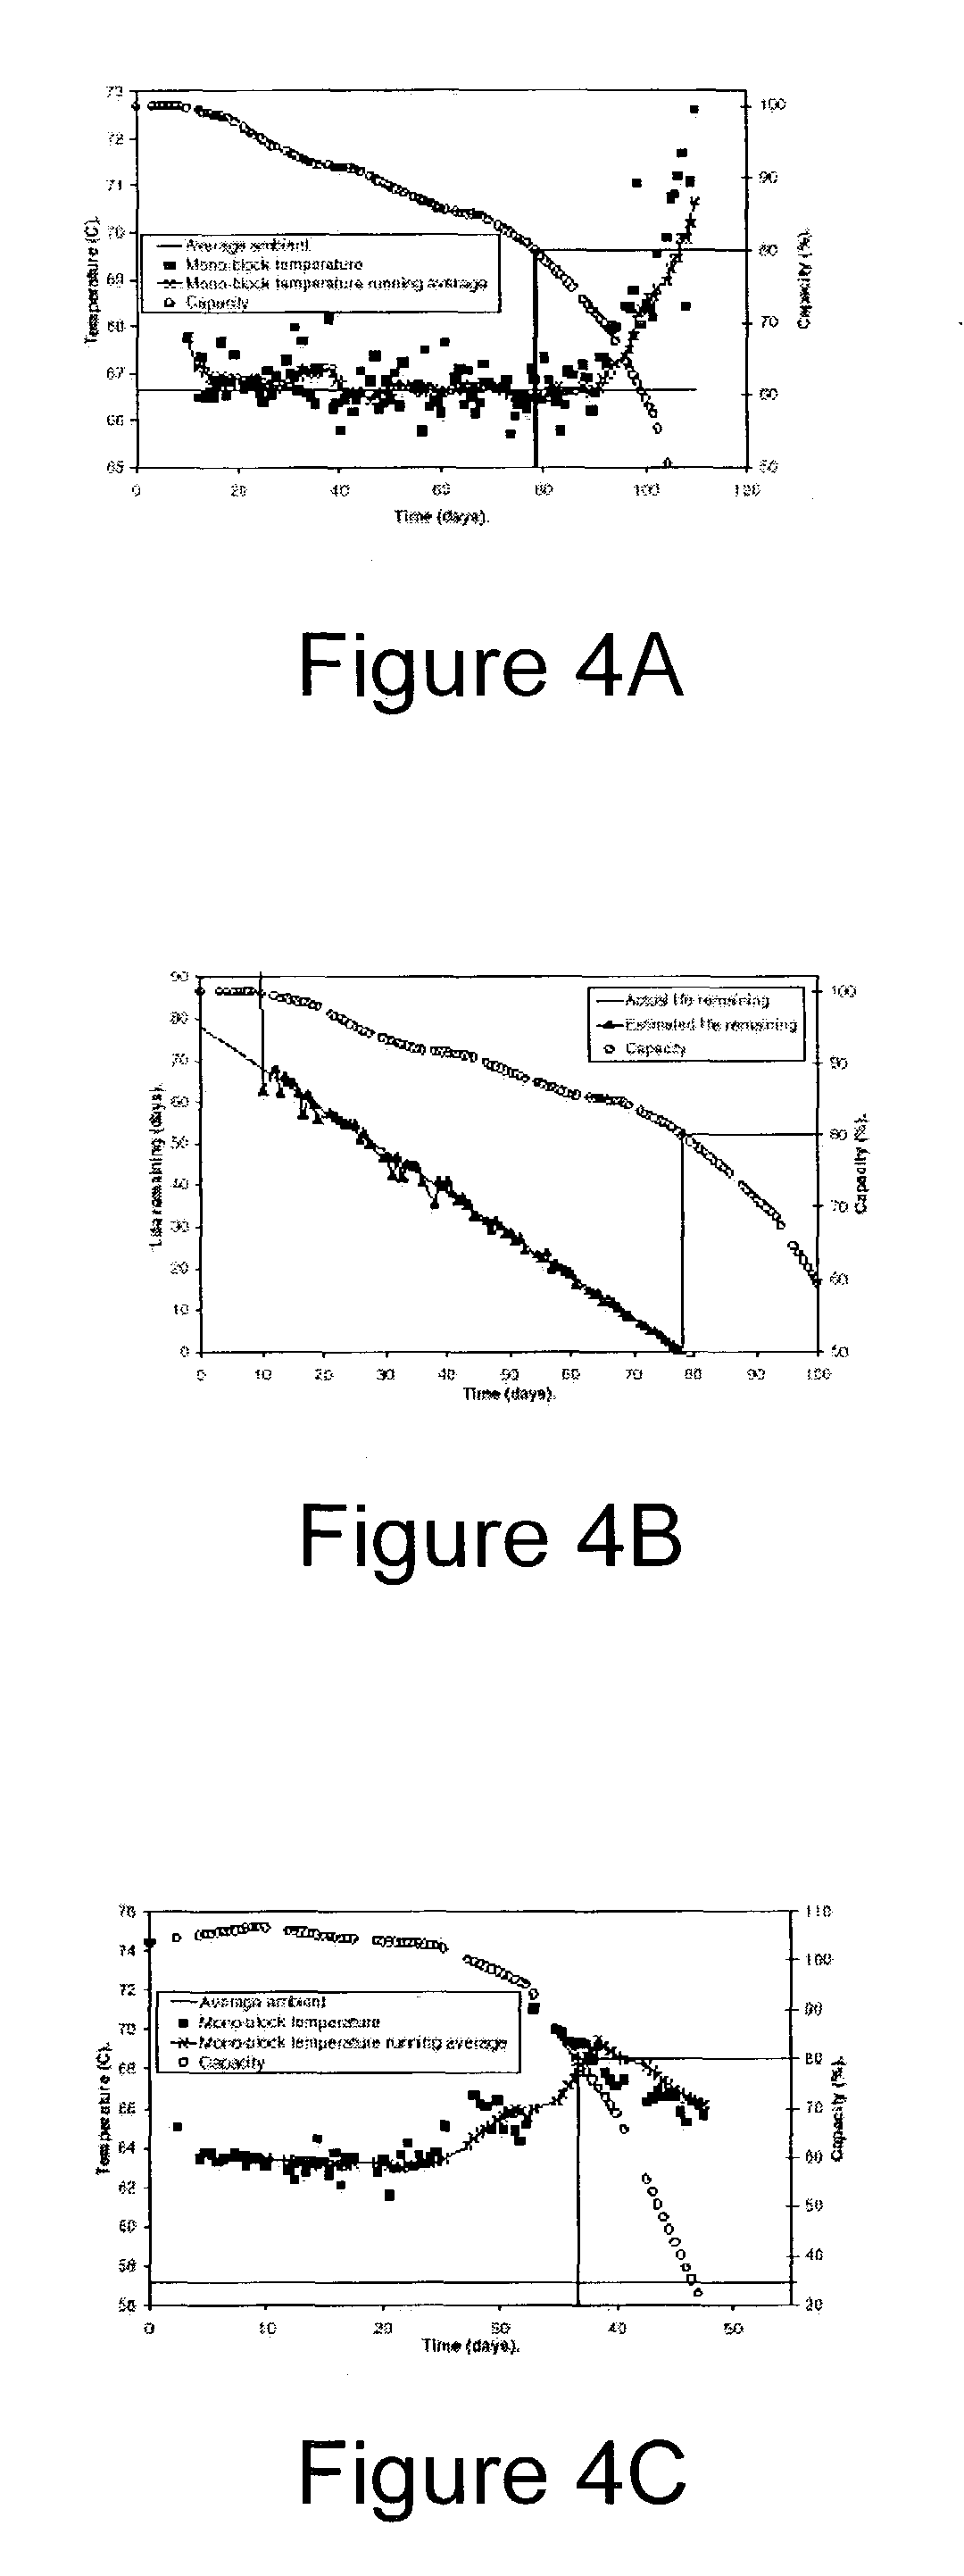 Apparatus, methods and computer program products for estimation of battery reserve life using adaptively modified state of health indicator-based reserve life models